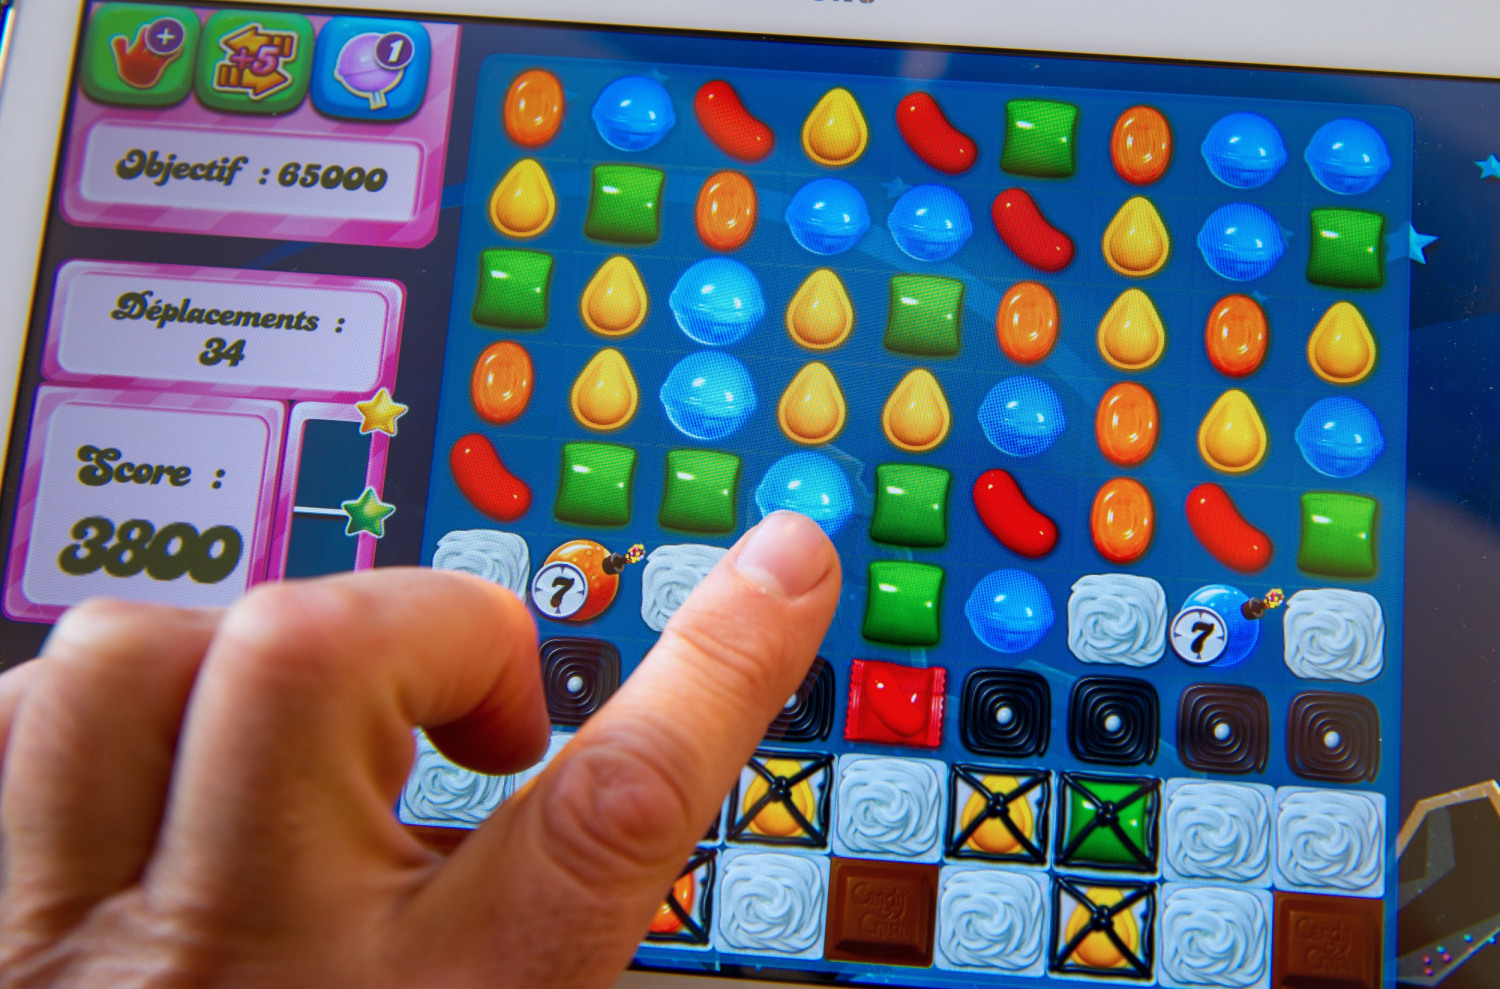 Video Game Juggernaut Activision Blizzard to Buy 'Candy Crush